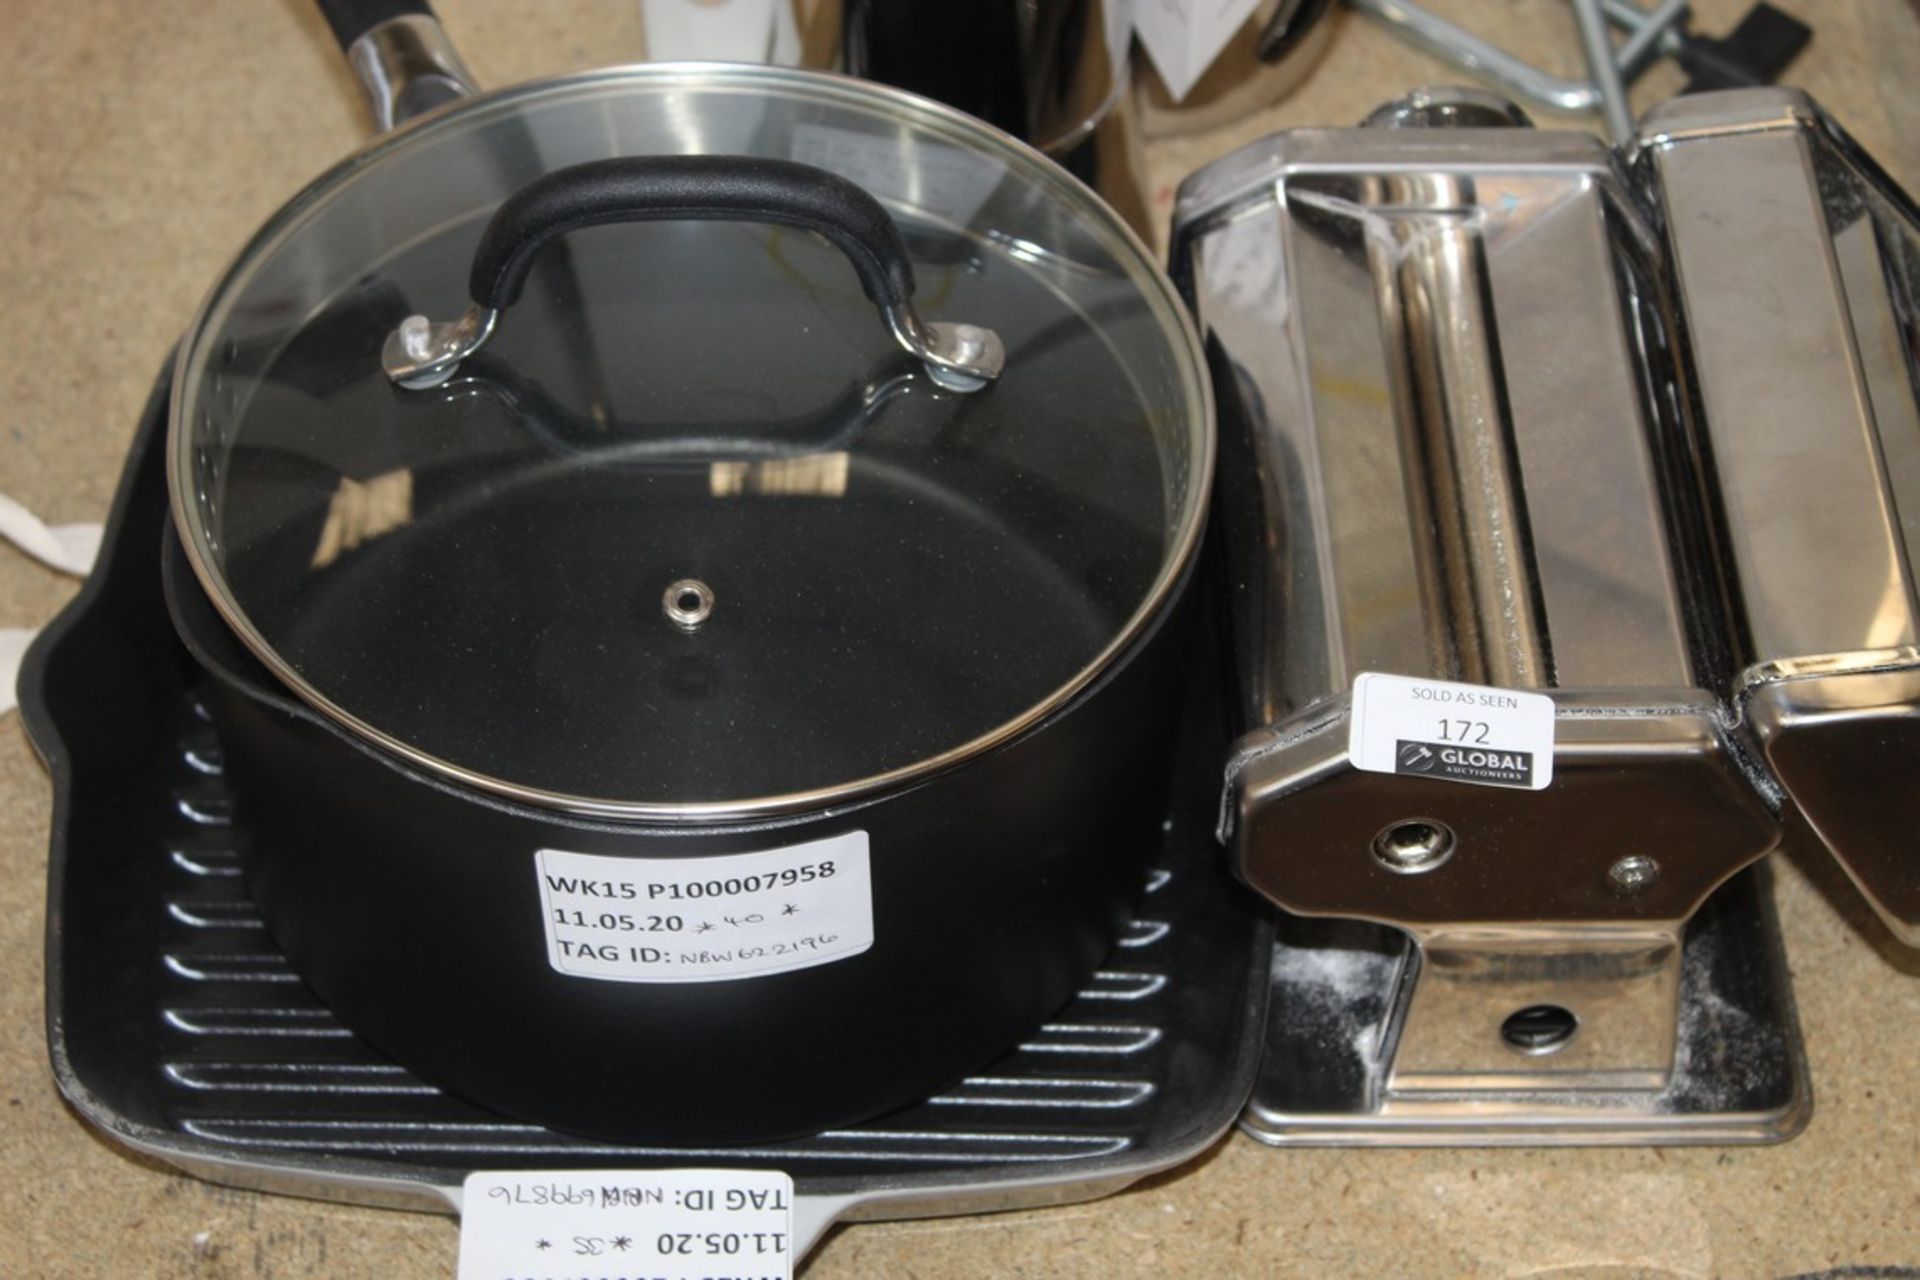 Assorted Items To Include Induction Cafetire, Pasta Machine, Skillet Pan & Sauce Pan RRP £35-40